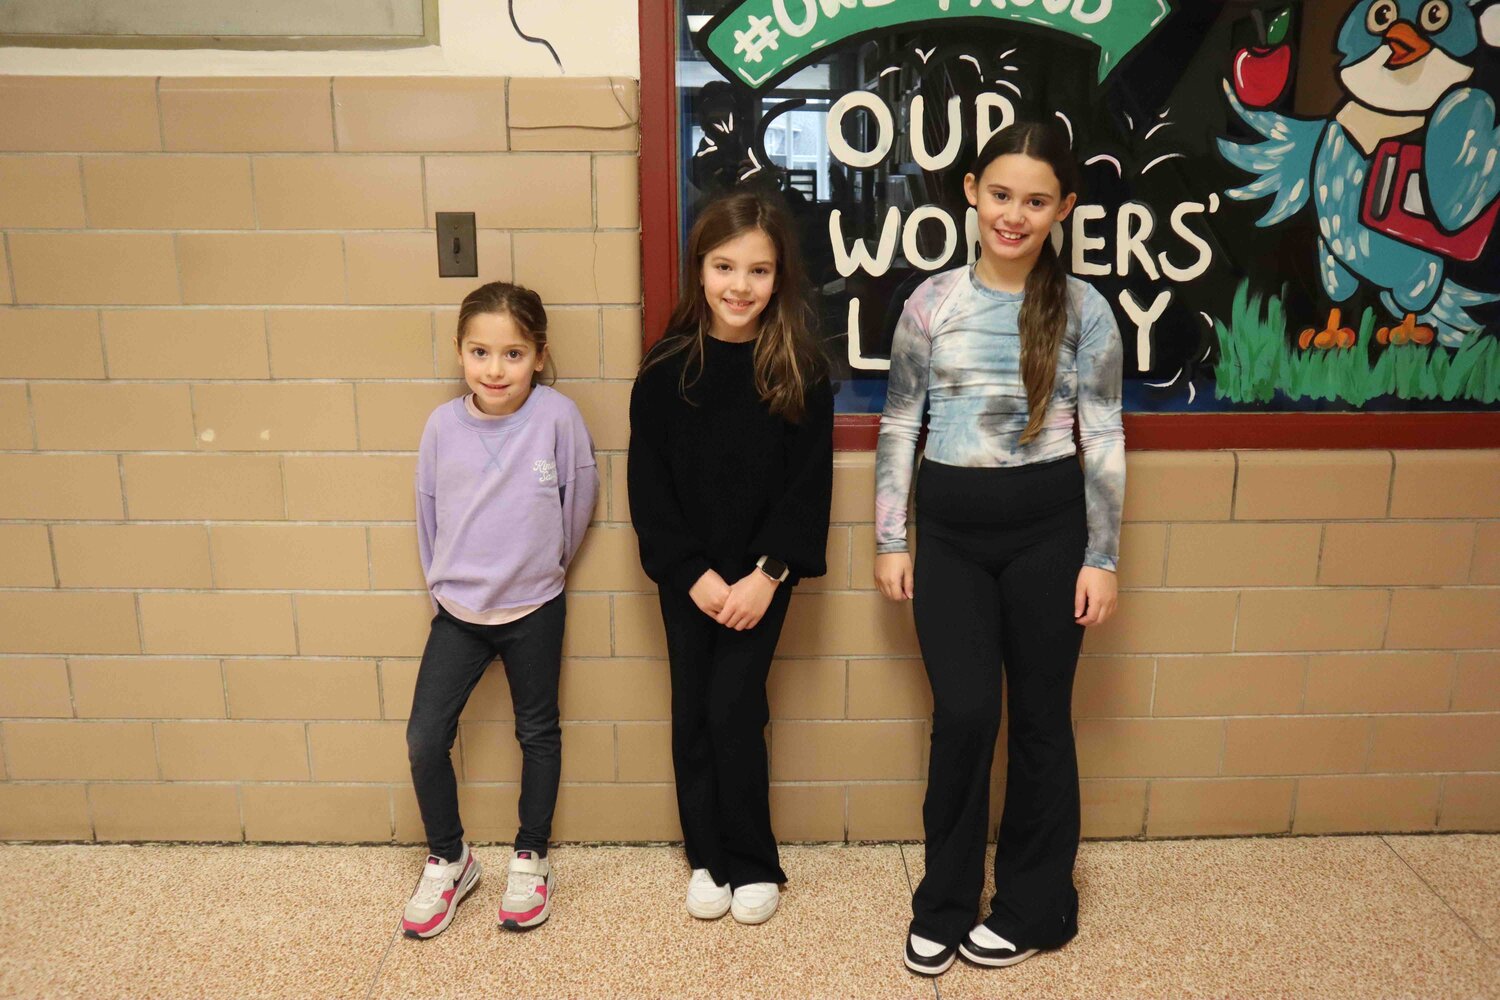 On March 10, these three students from Waverly park will have their art presented in East Meadow.